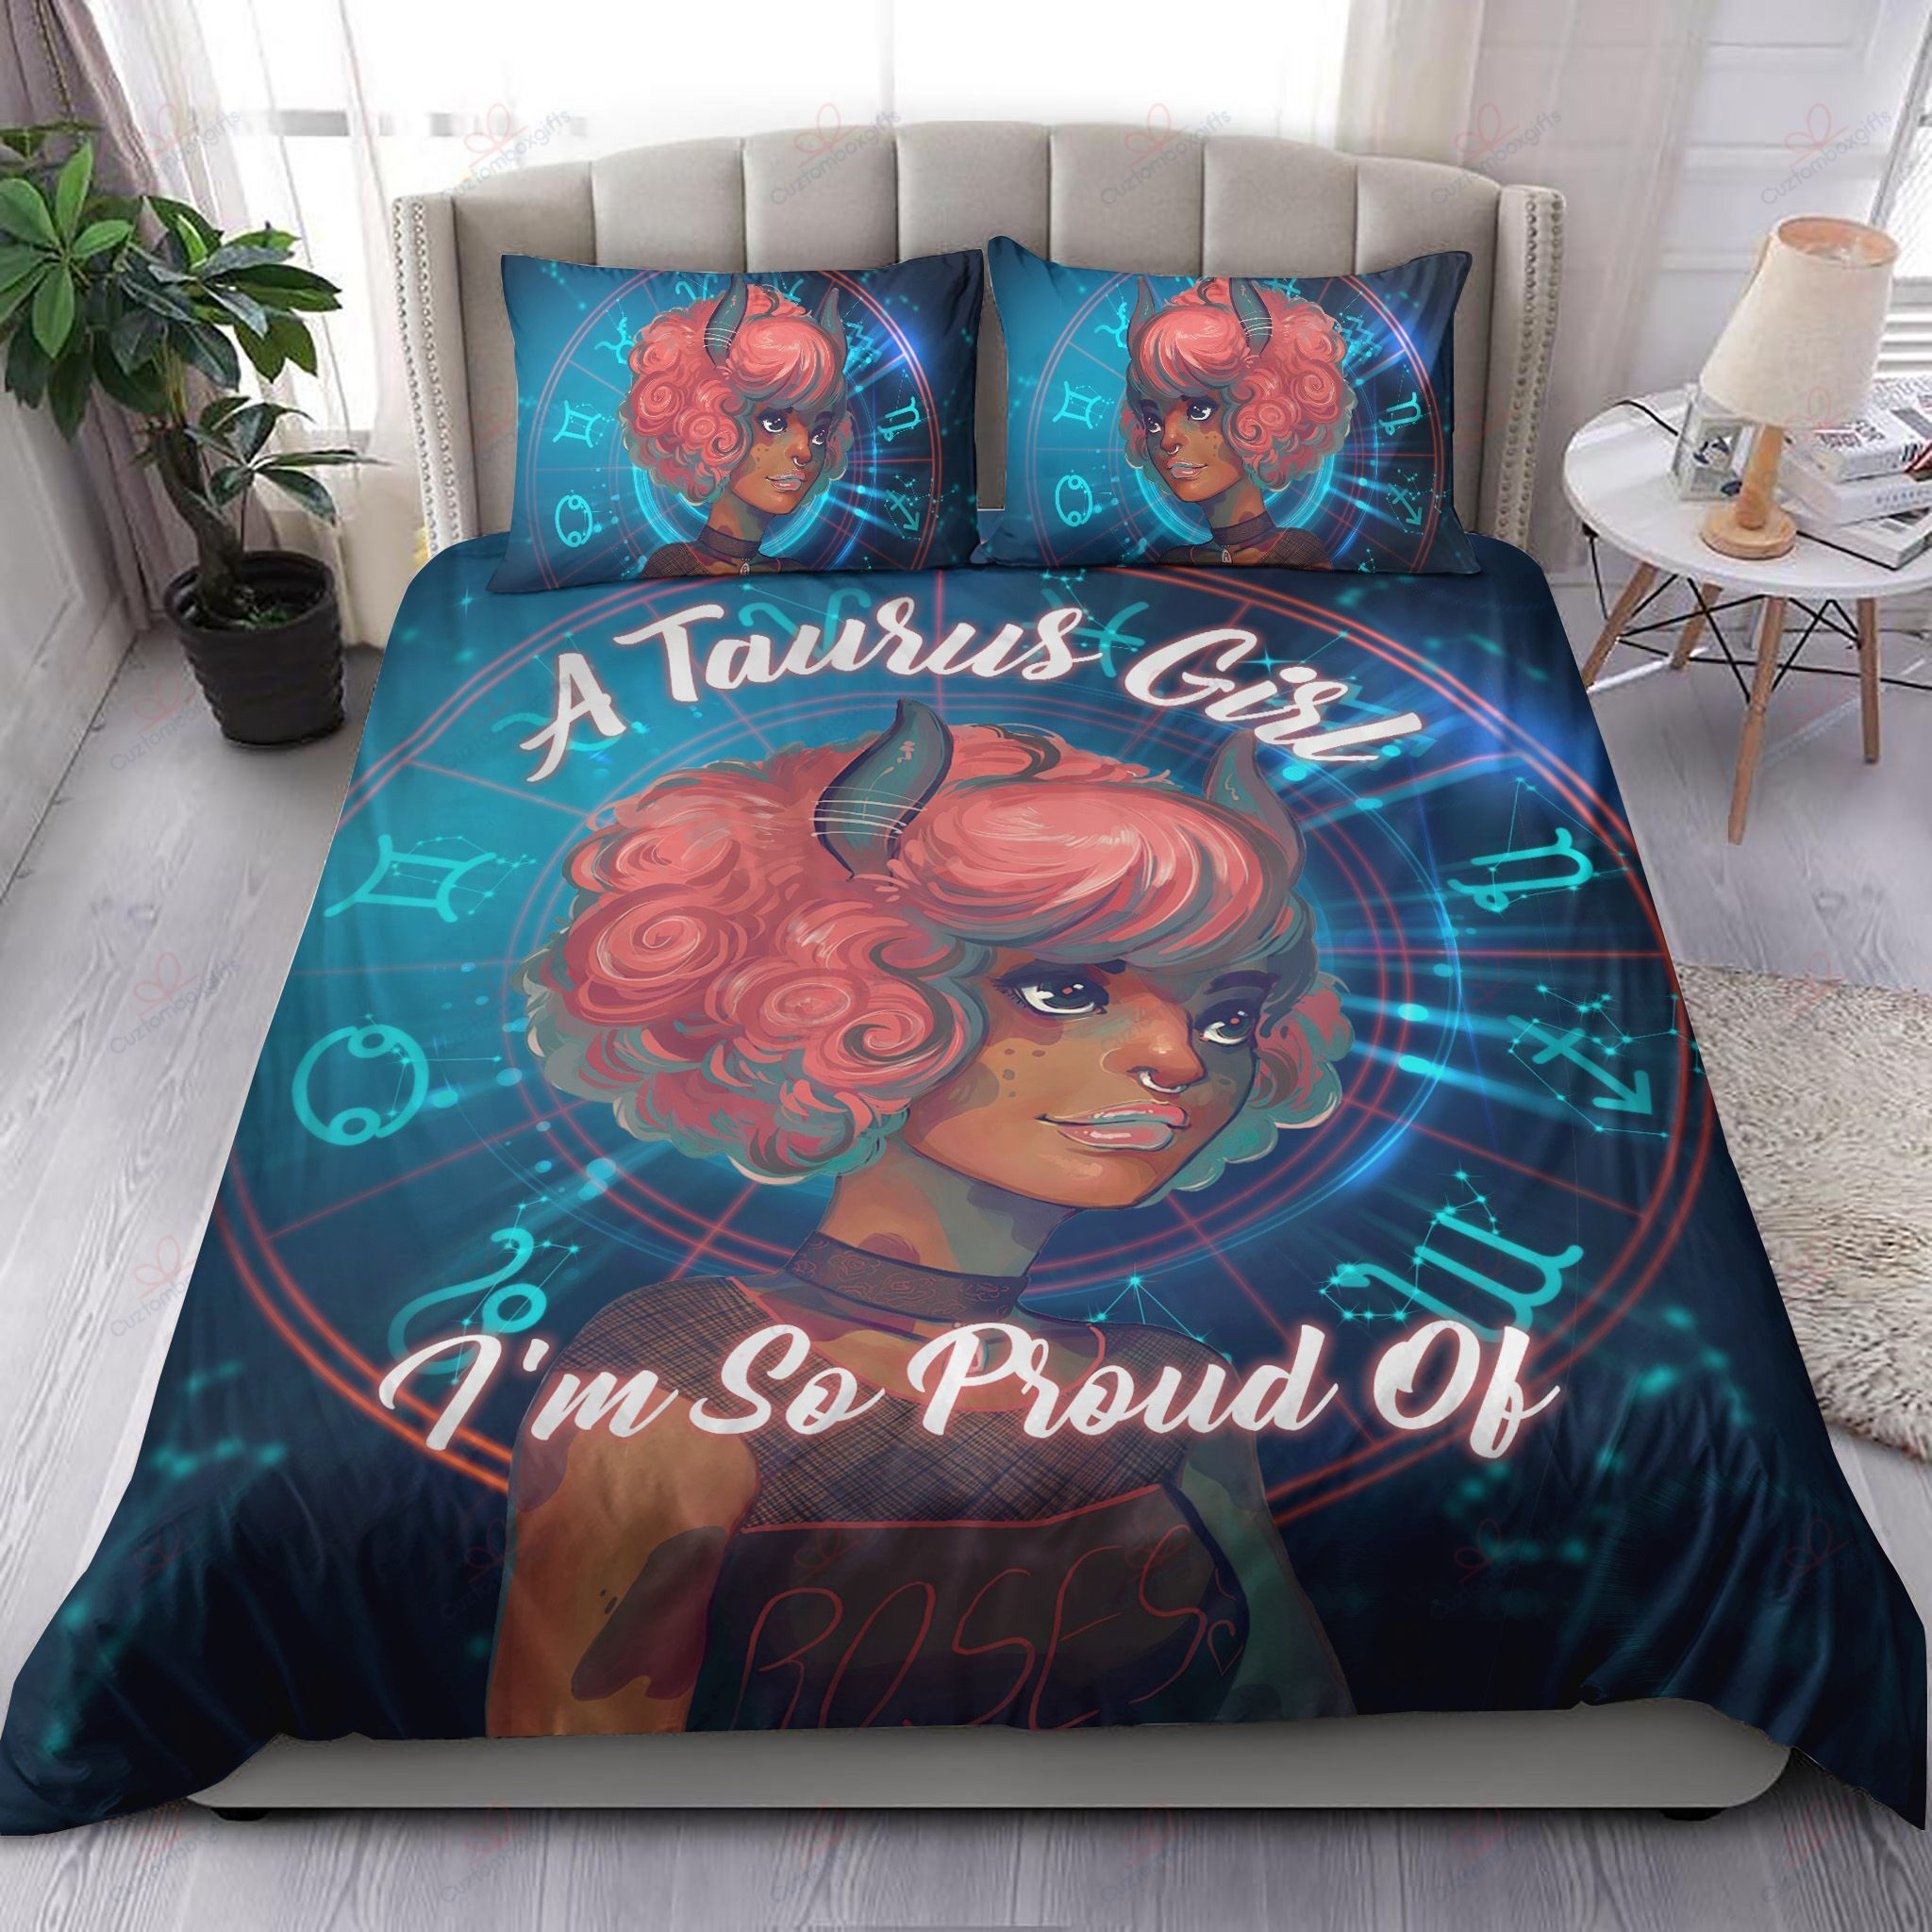 taurus woman african american woman i am proud of bedding collection bed linens coverlet duvet bedding ensembles ppkys